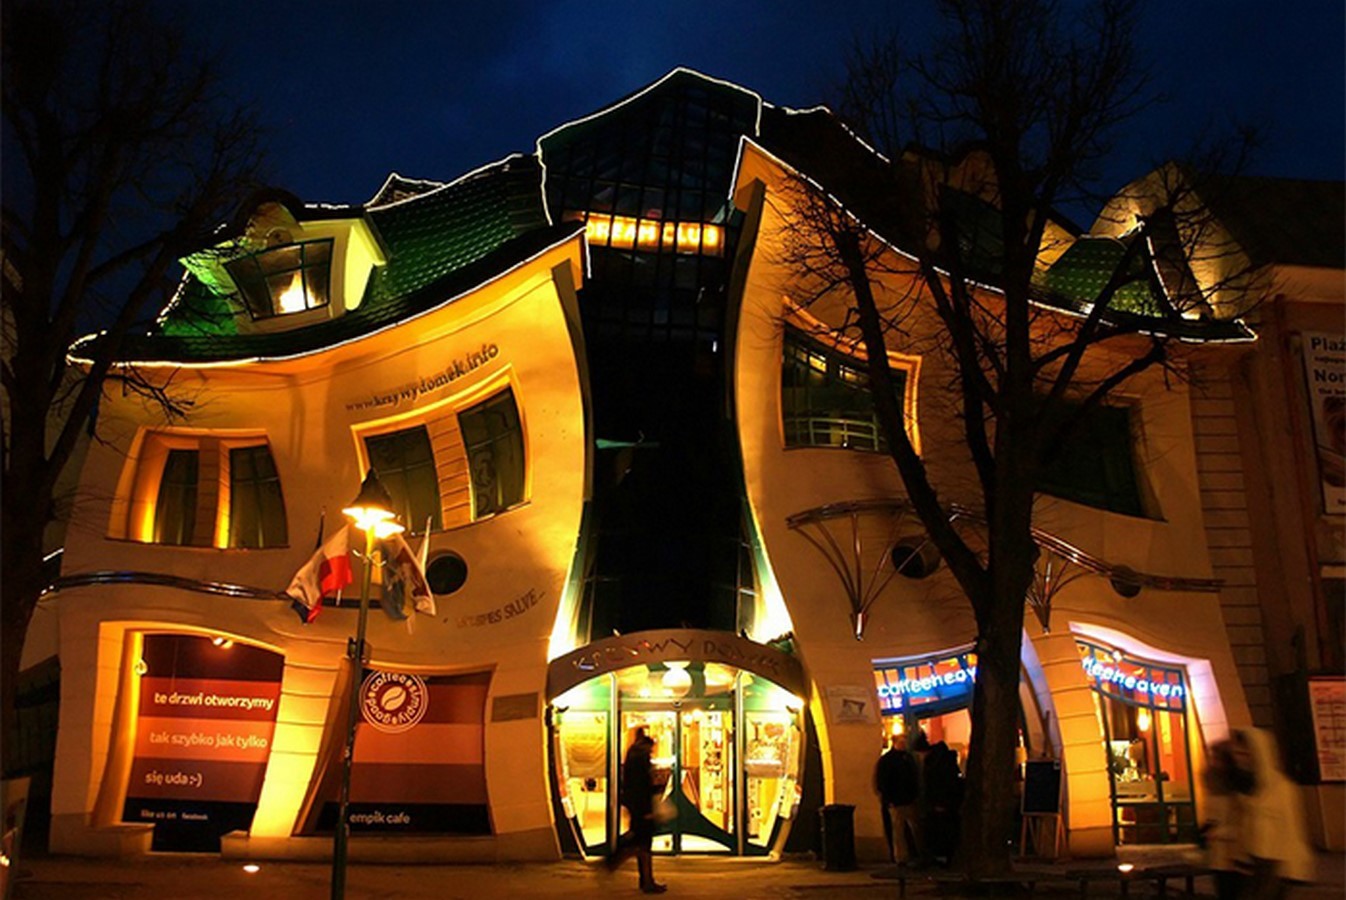 the crooked house